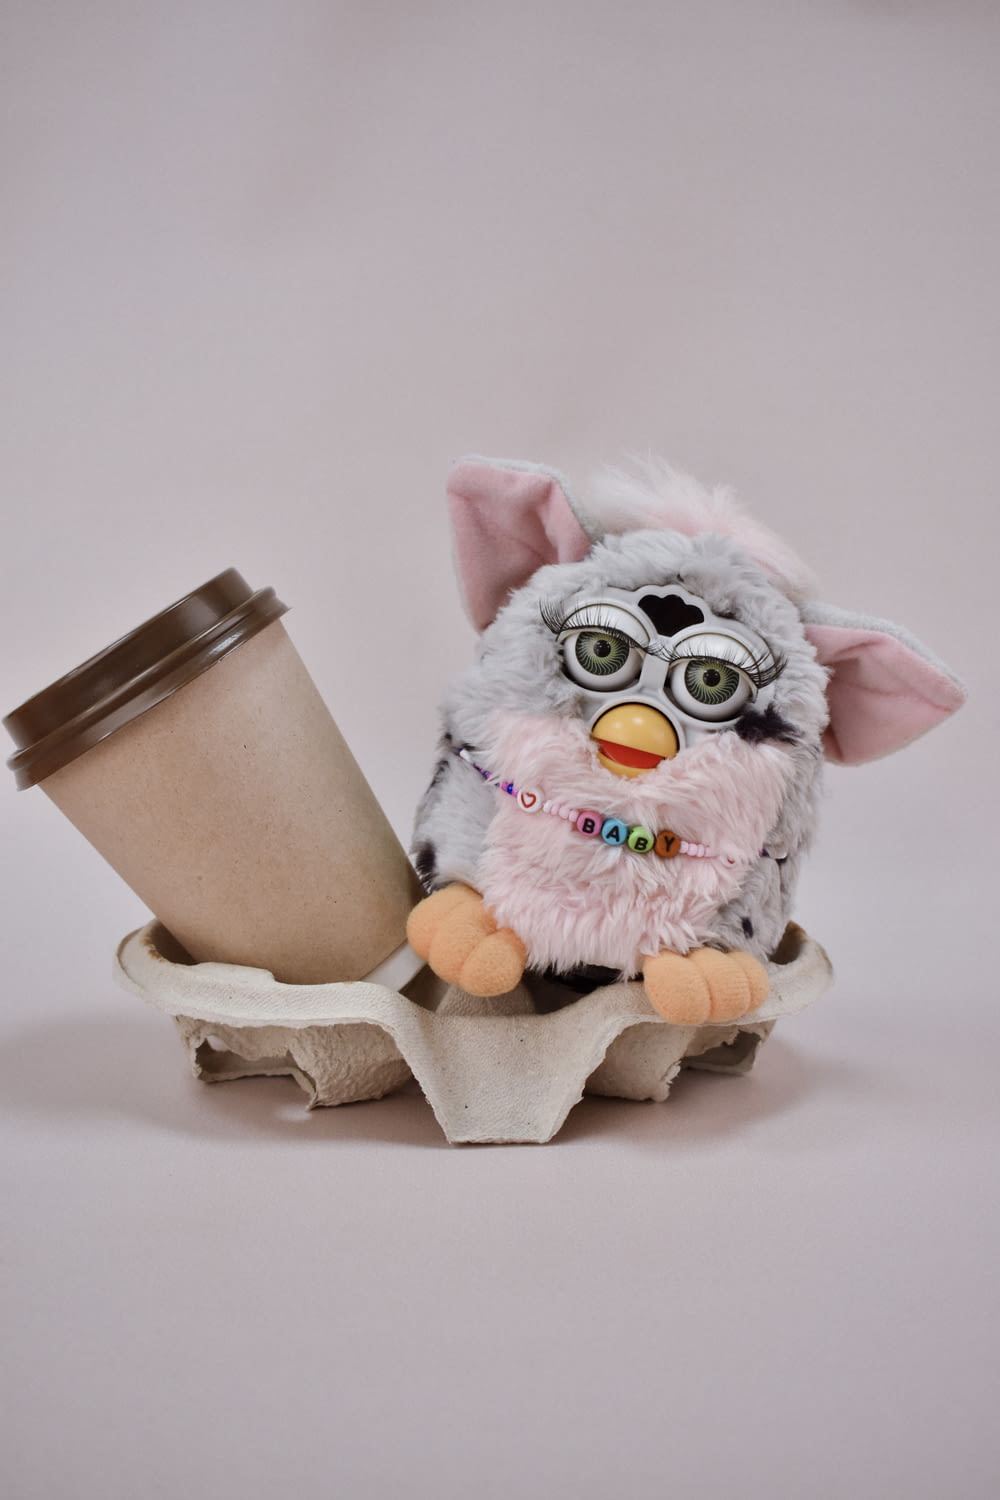 a stuffed animal holding a cup of coffee